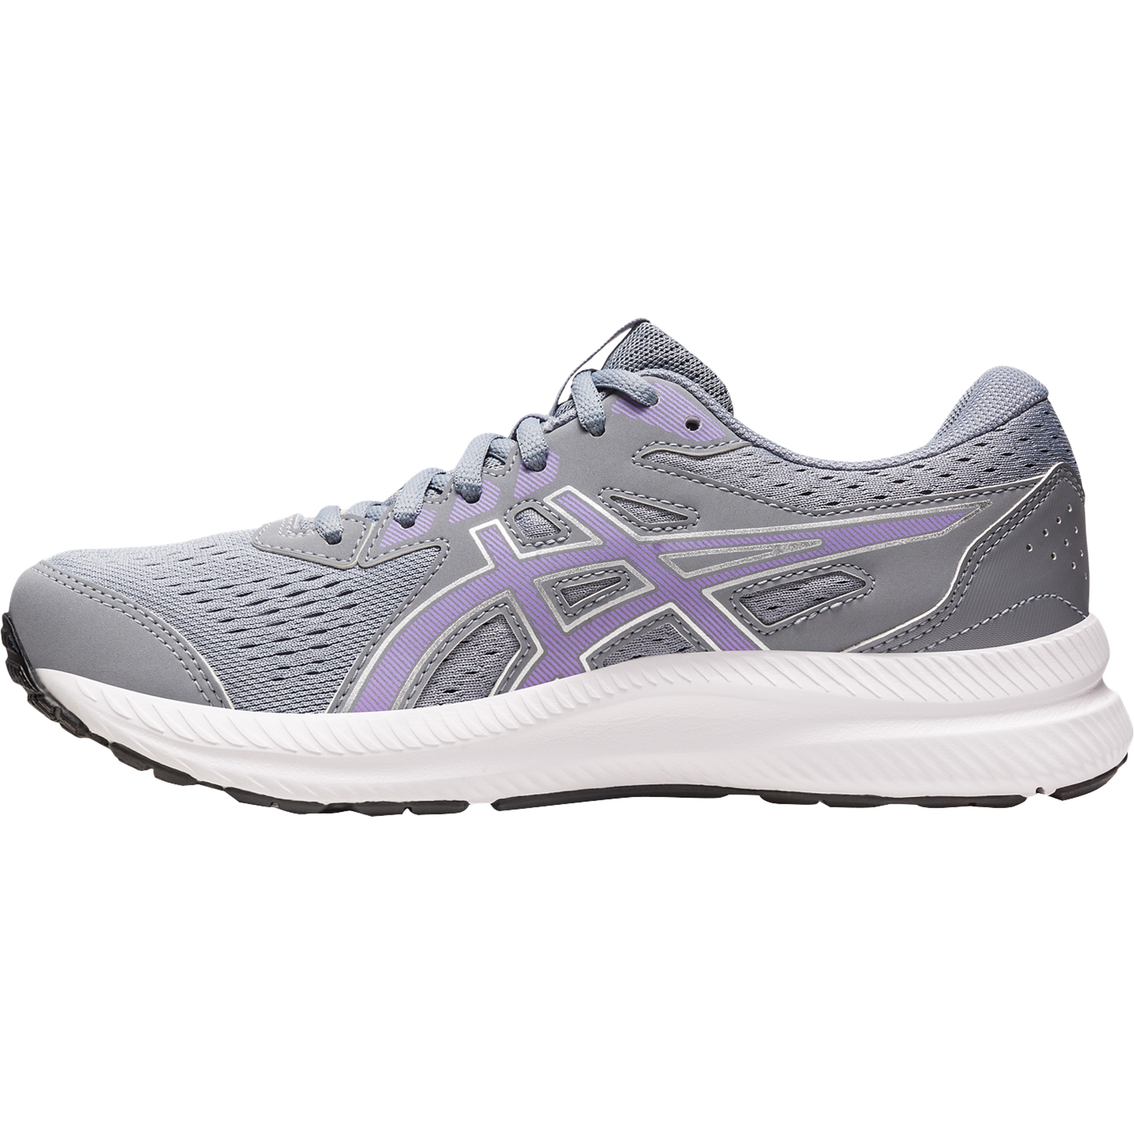 ASICS Women's GEL-Contend 8 Running Shoes - Image 3 of 7